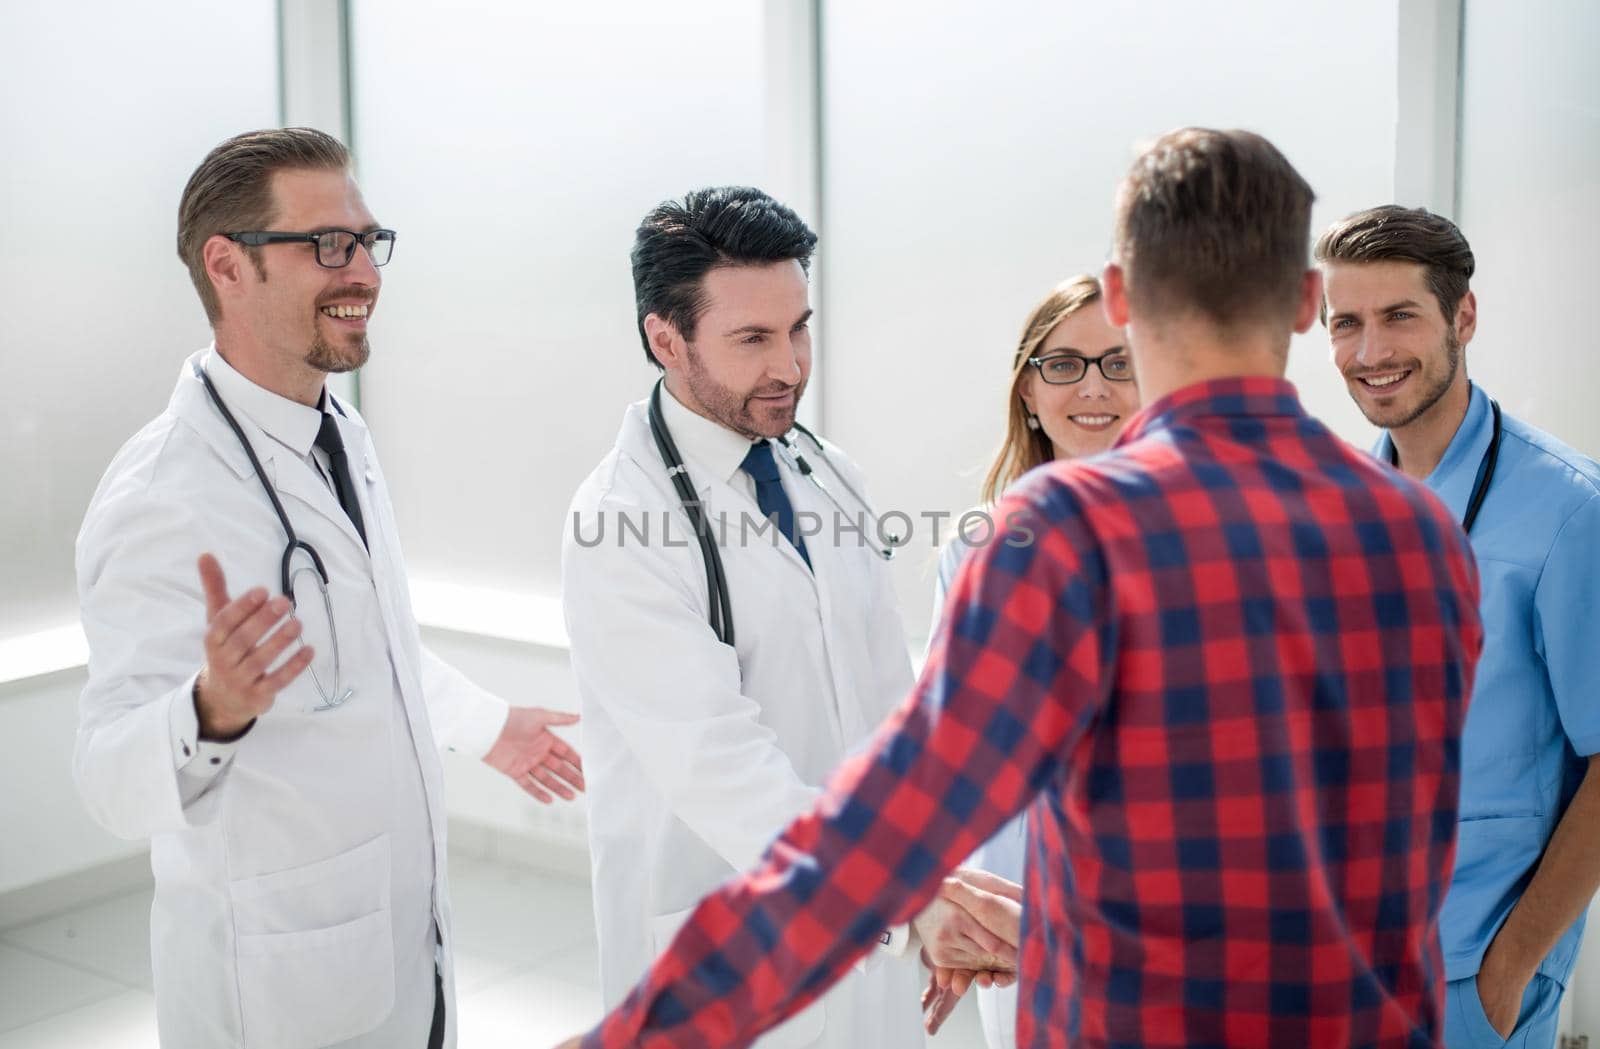 doctors welcome the patient prior to medical examination